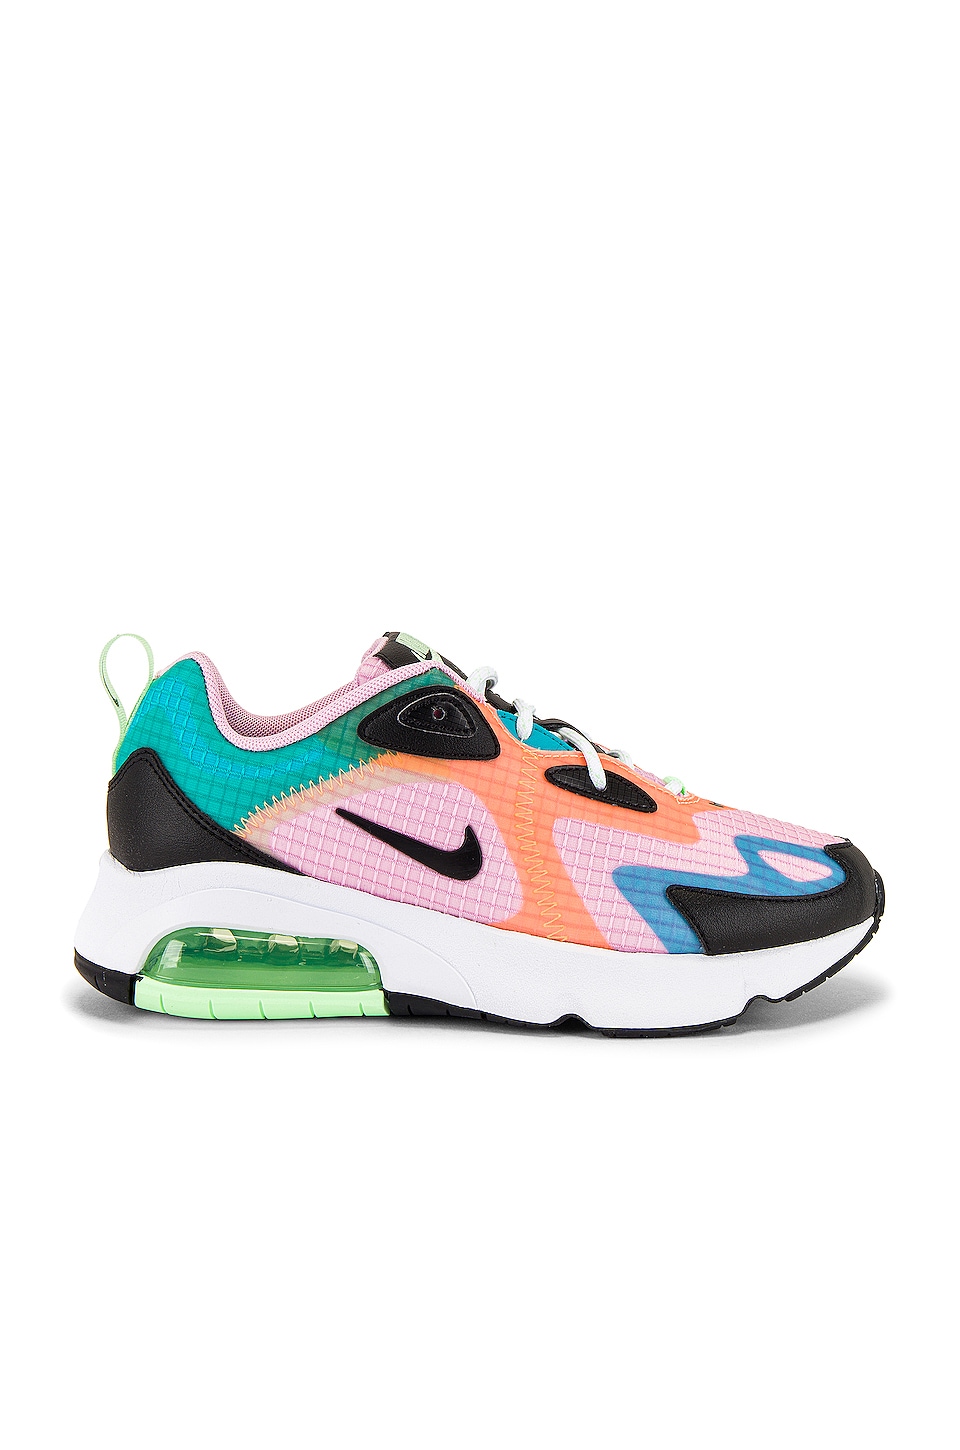 nike air max 200 sneakers in white green and pink